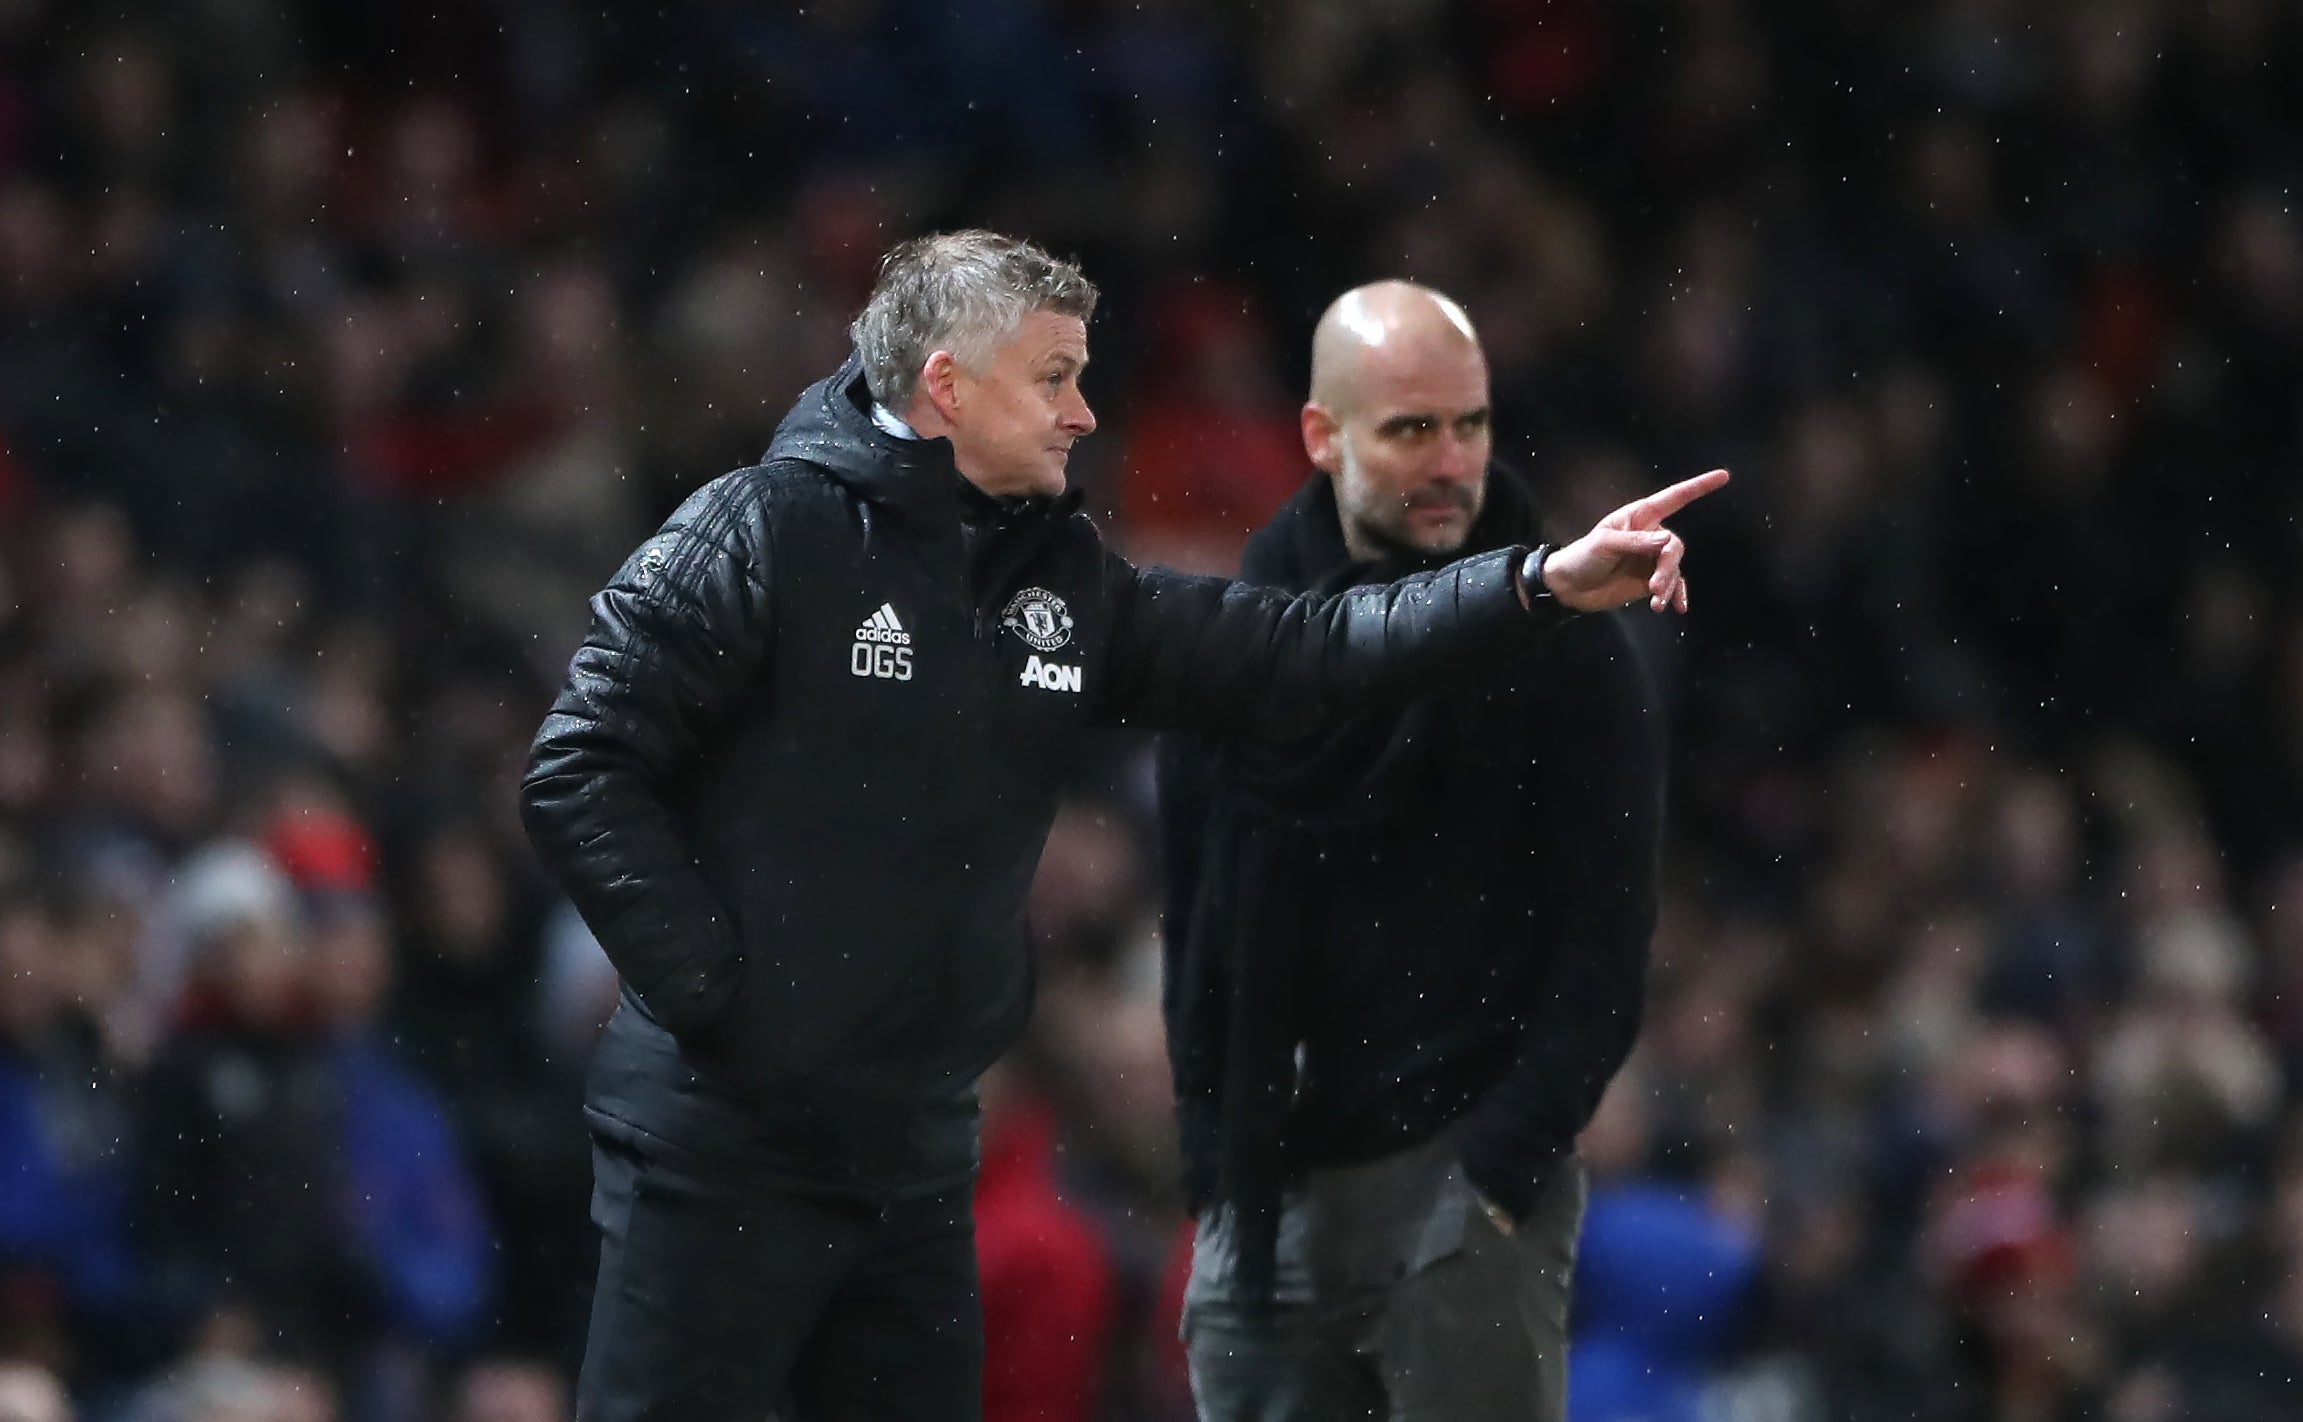 Manchester United take on Man City at Old Trafford on Saturday